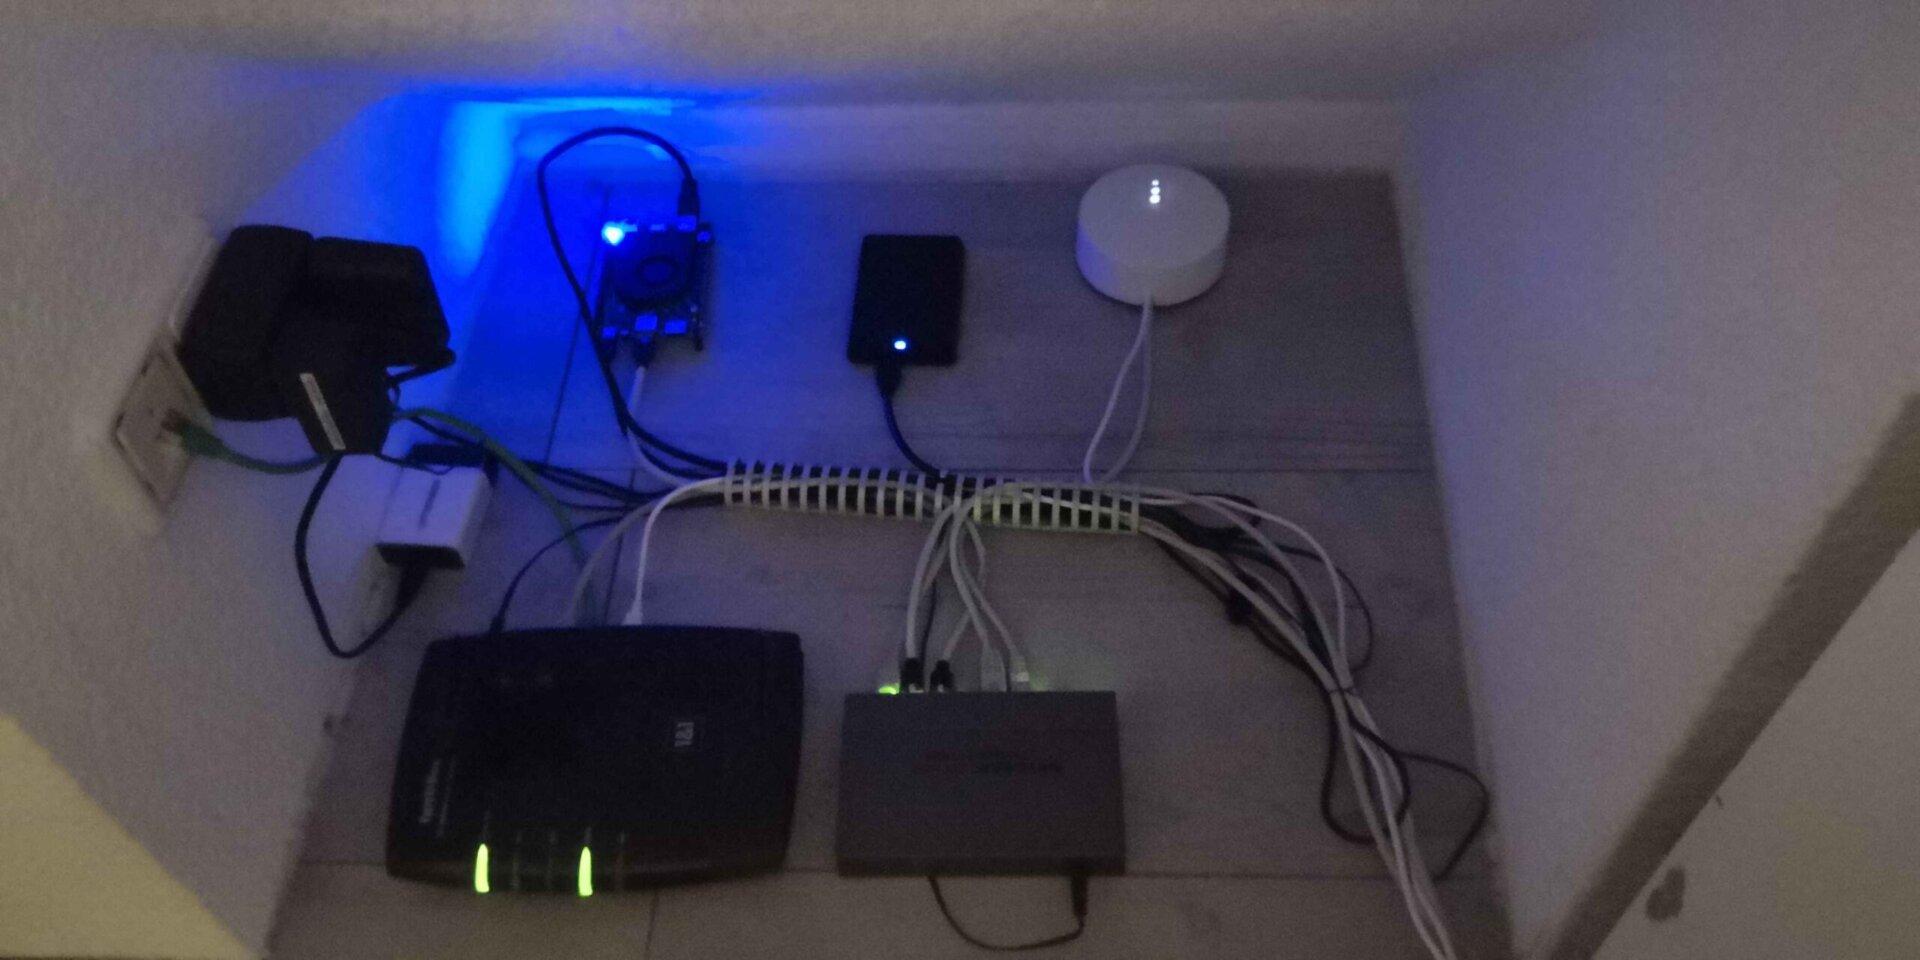 Old, grainy picture of micro Homelab